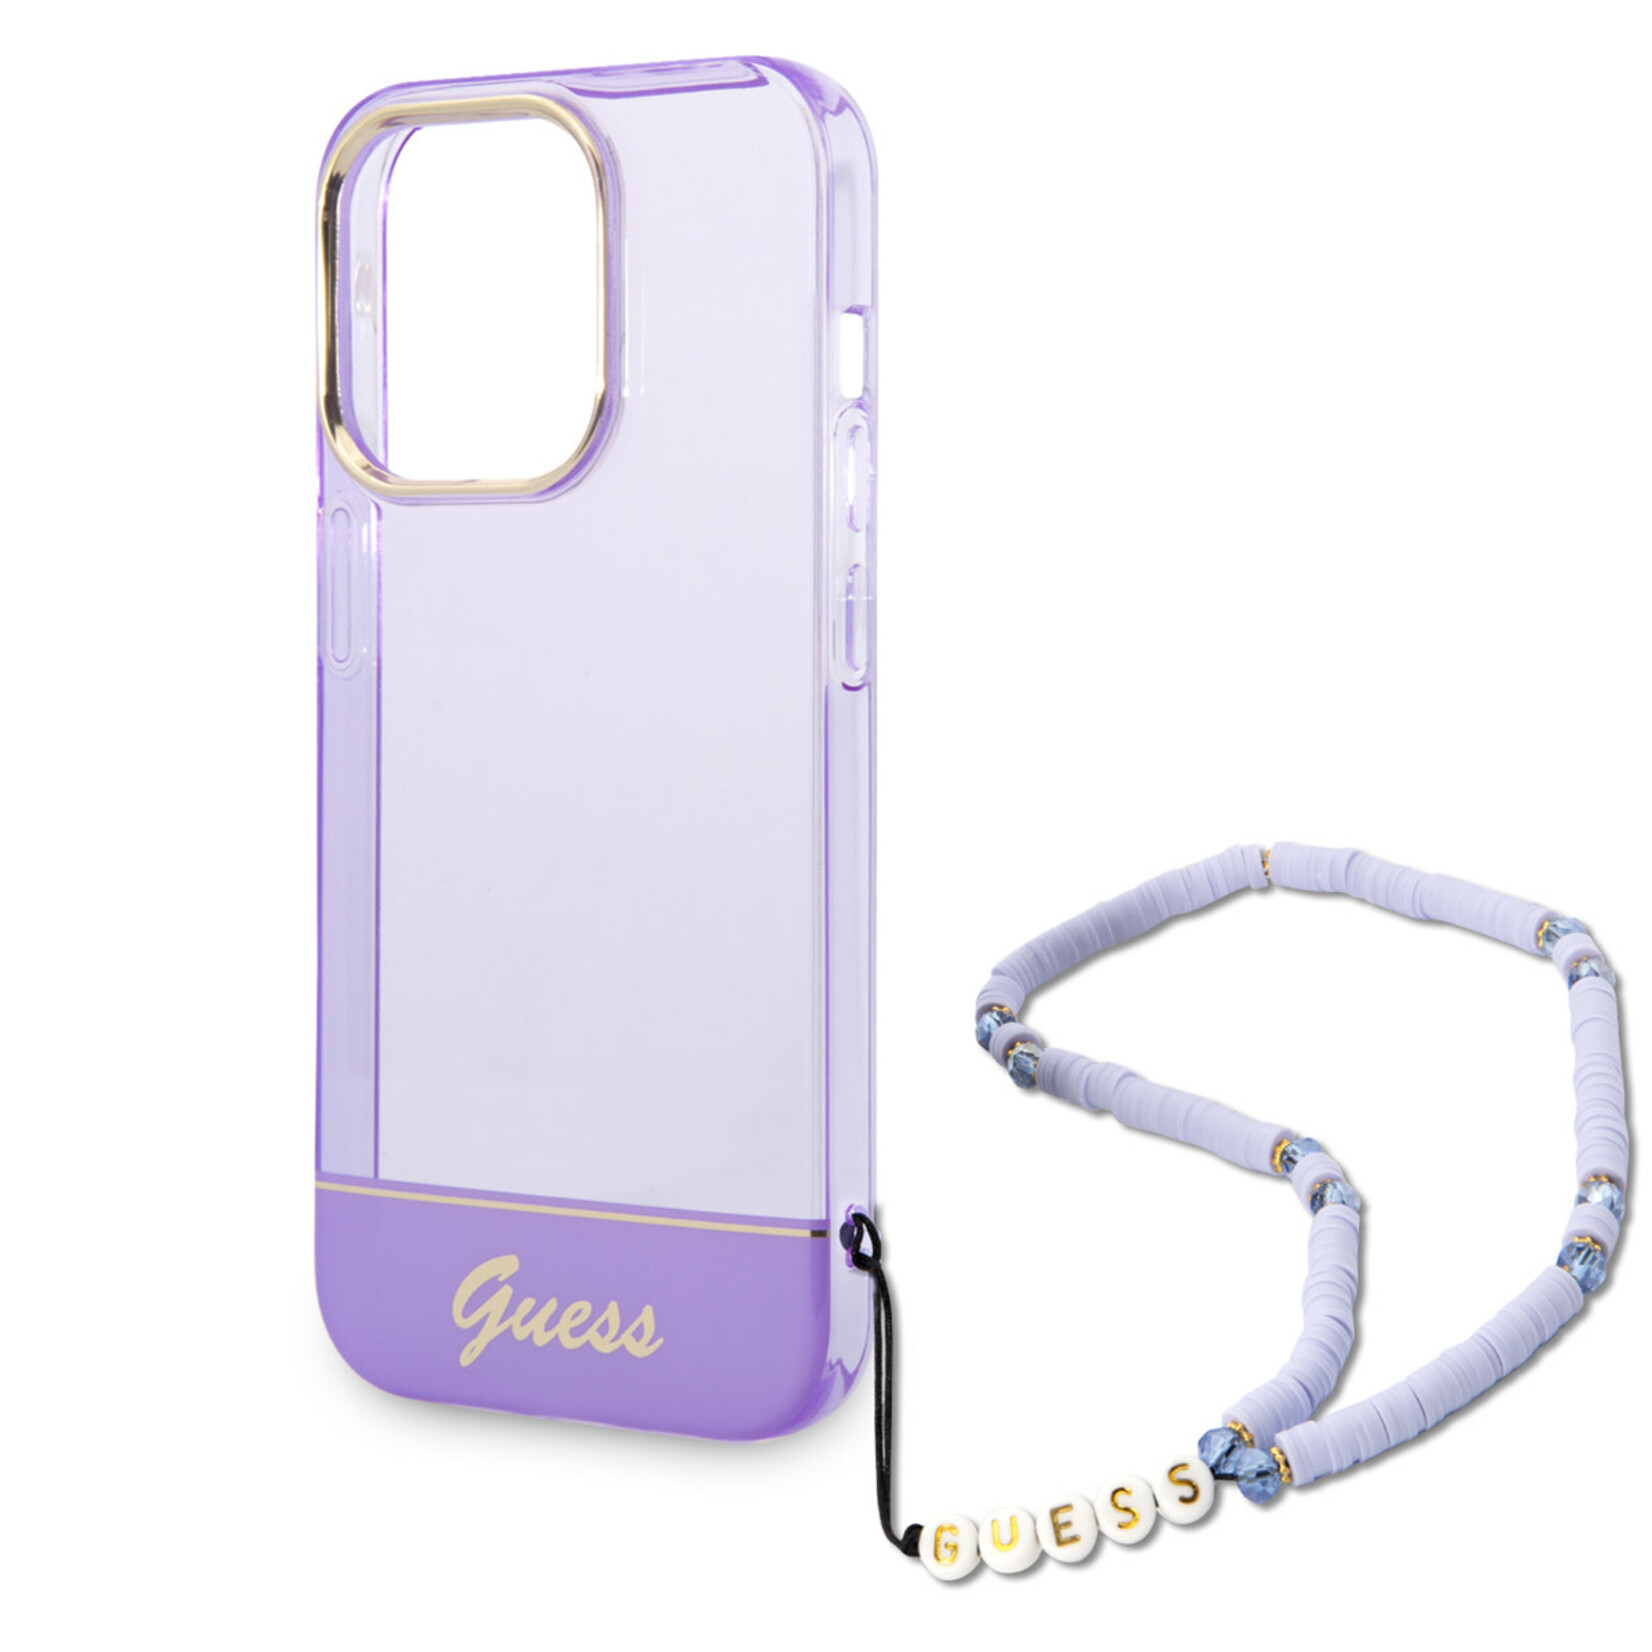 Guess GUESS TPU Back Cover Telefoonhoesje voor Apple iPhone 14 Pro Max - Paars Transparant - Bescherming & Stijl